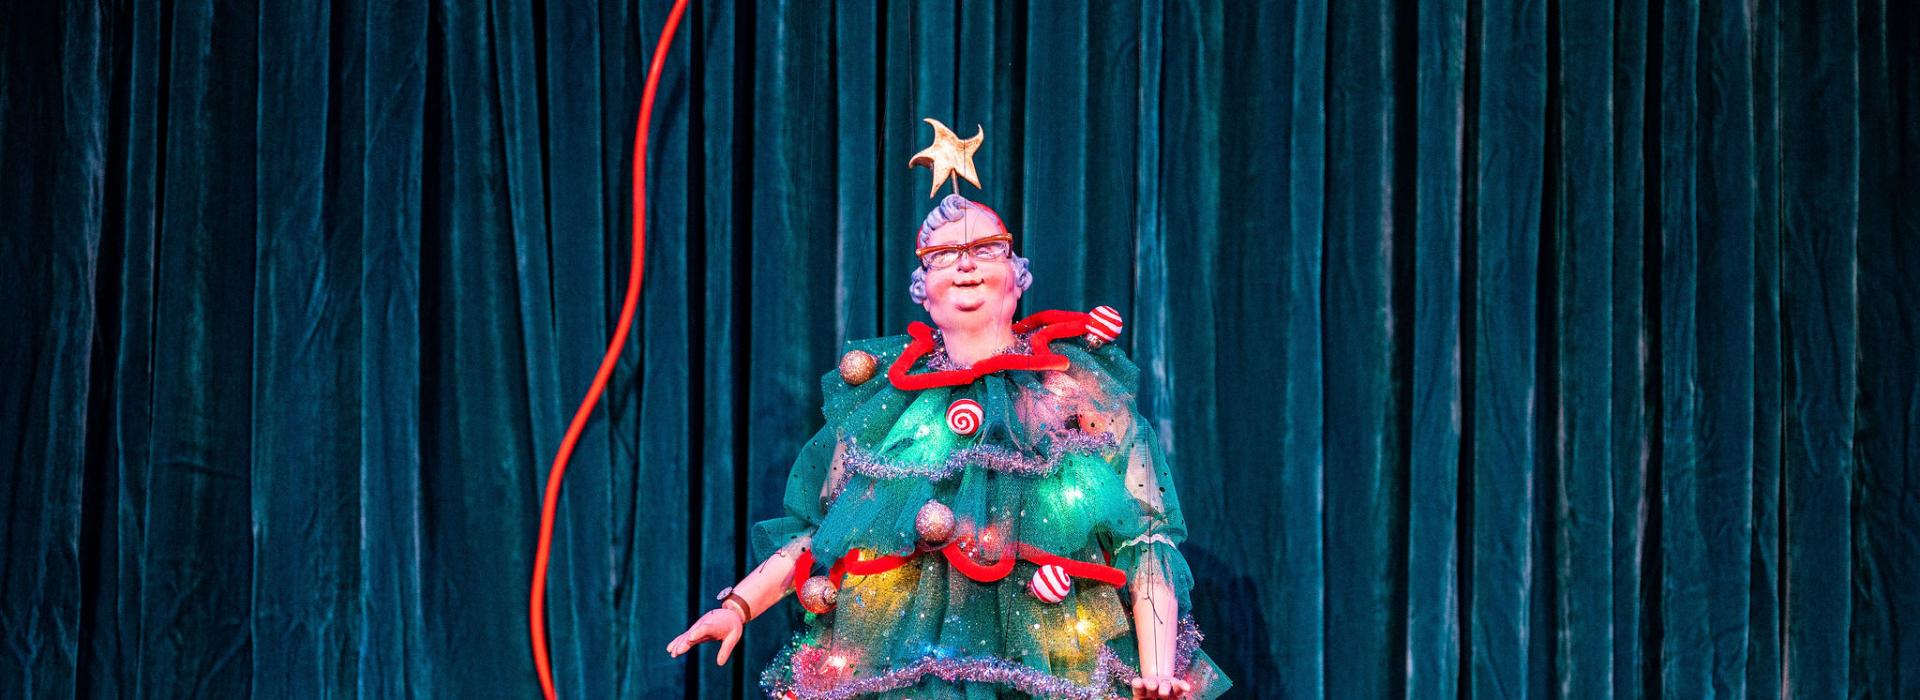 A marionette in a dress that resembles and is decorated like a christmas tree stands in front of a teal curtain.